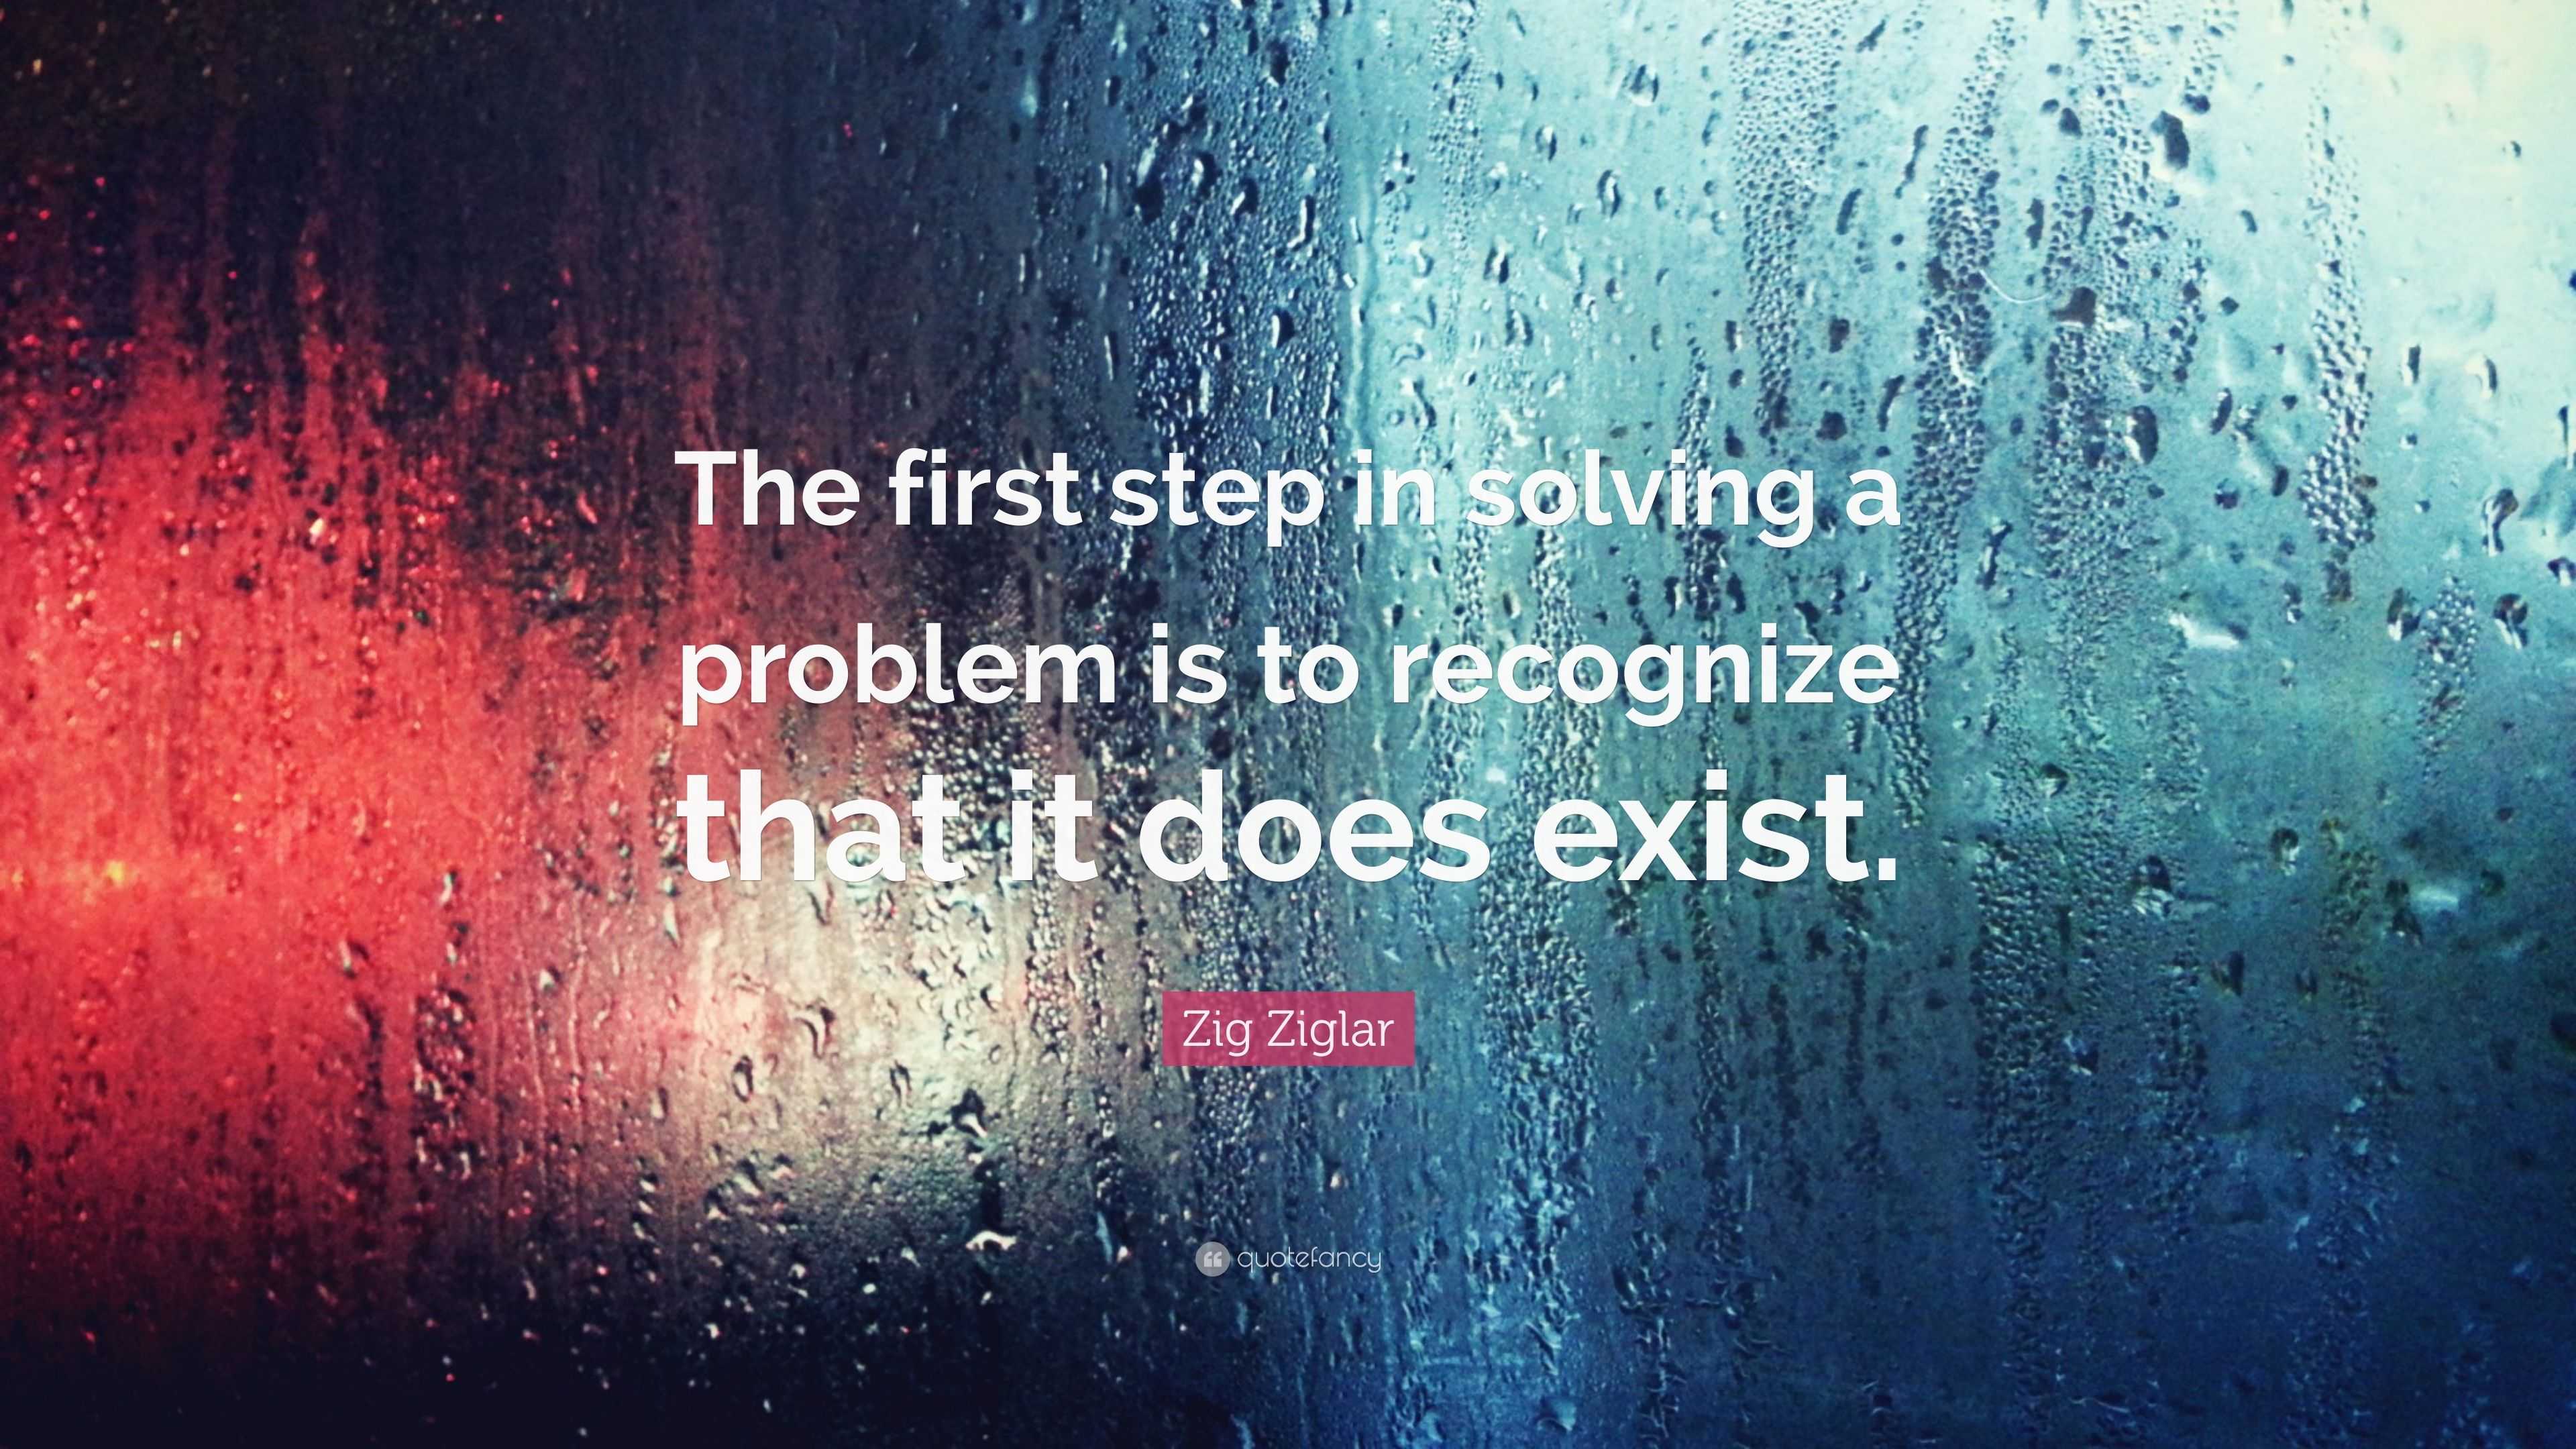 first step in solving any problem is recognizing there is one